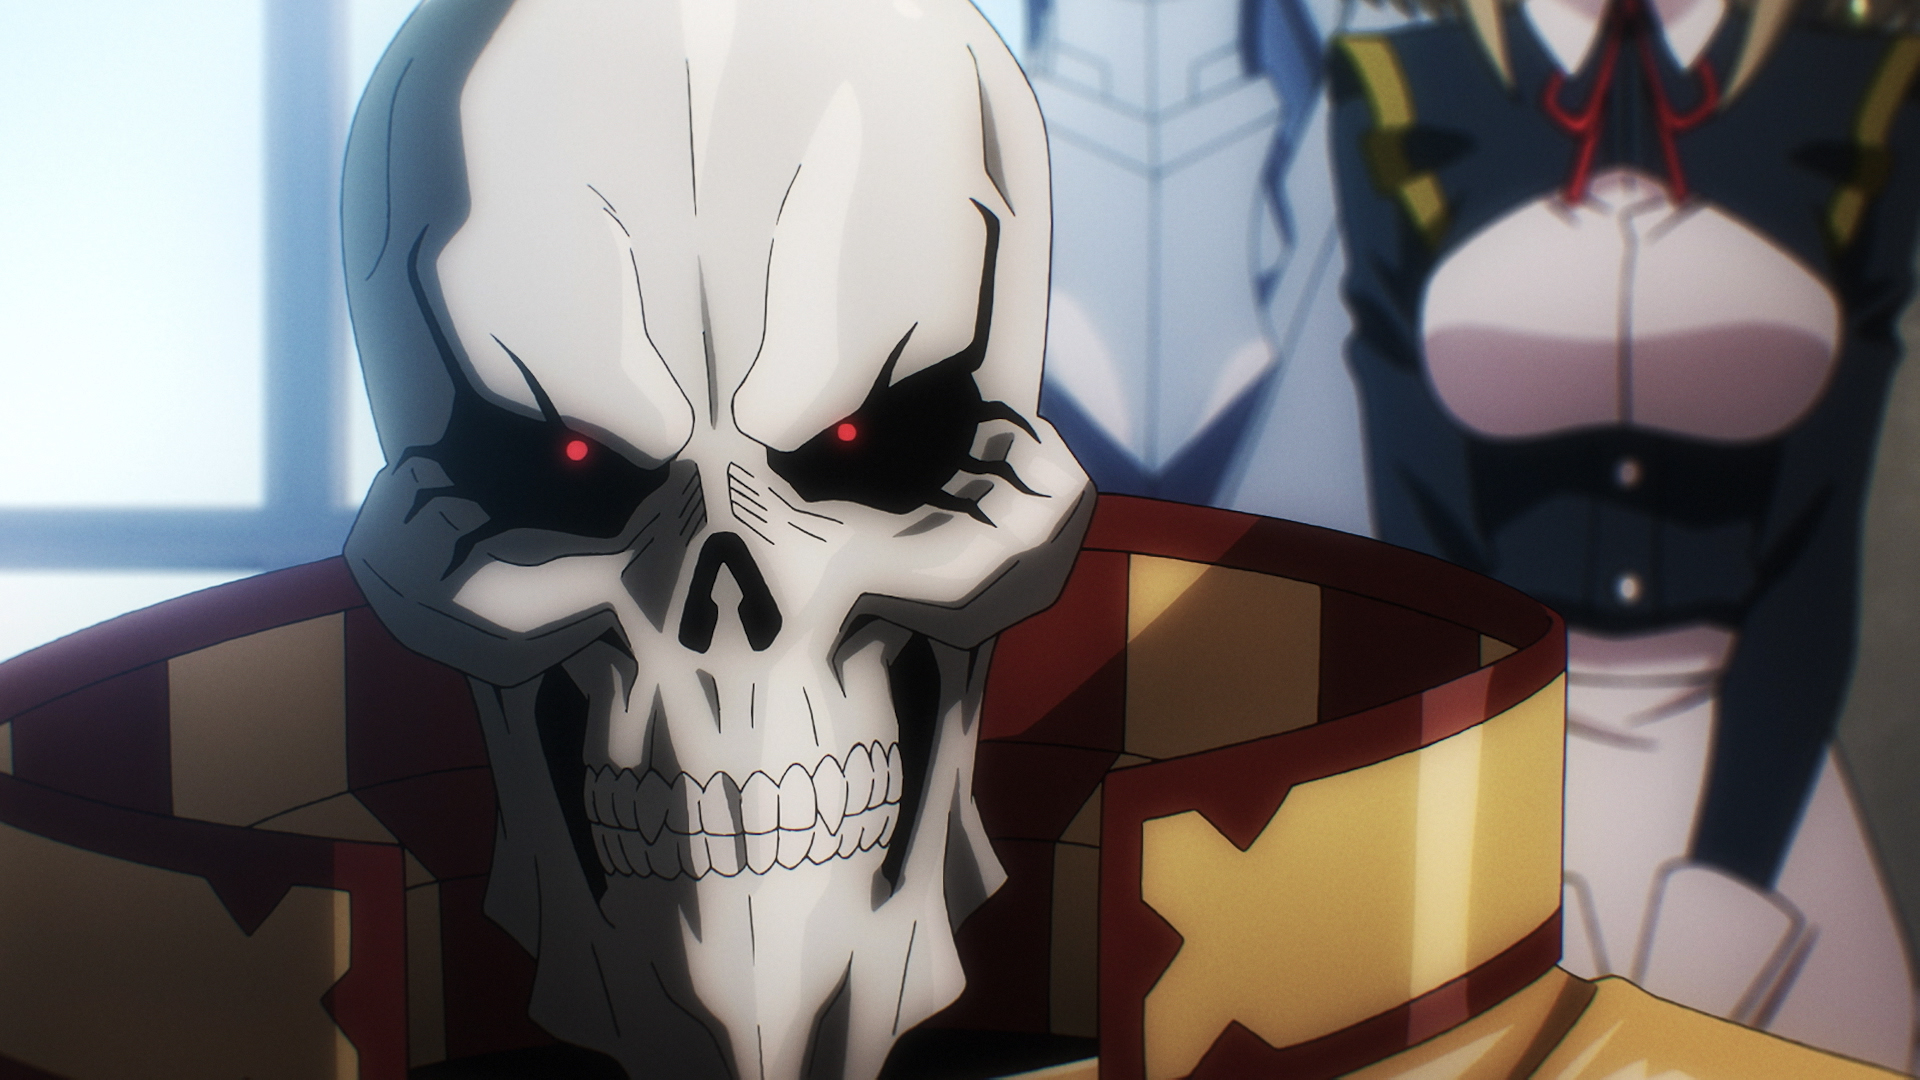 Crunchyroll - Ainz Takes Charge in New Trailer Revealing Overlord Season  4's July 5 Premiere